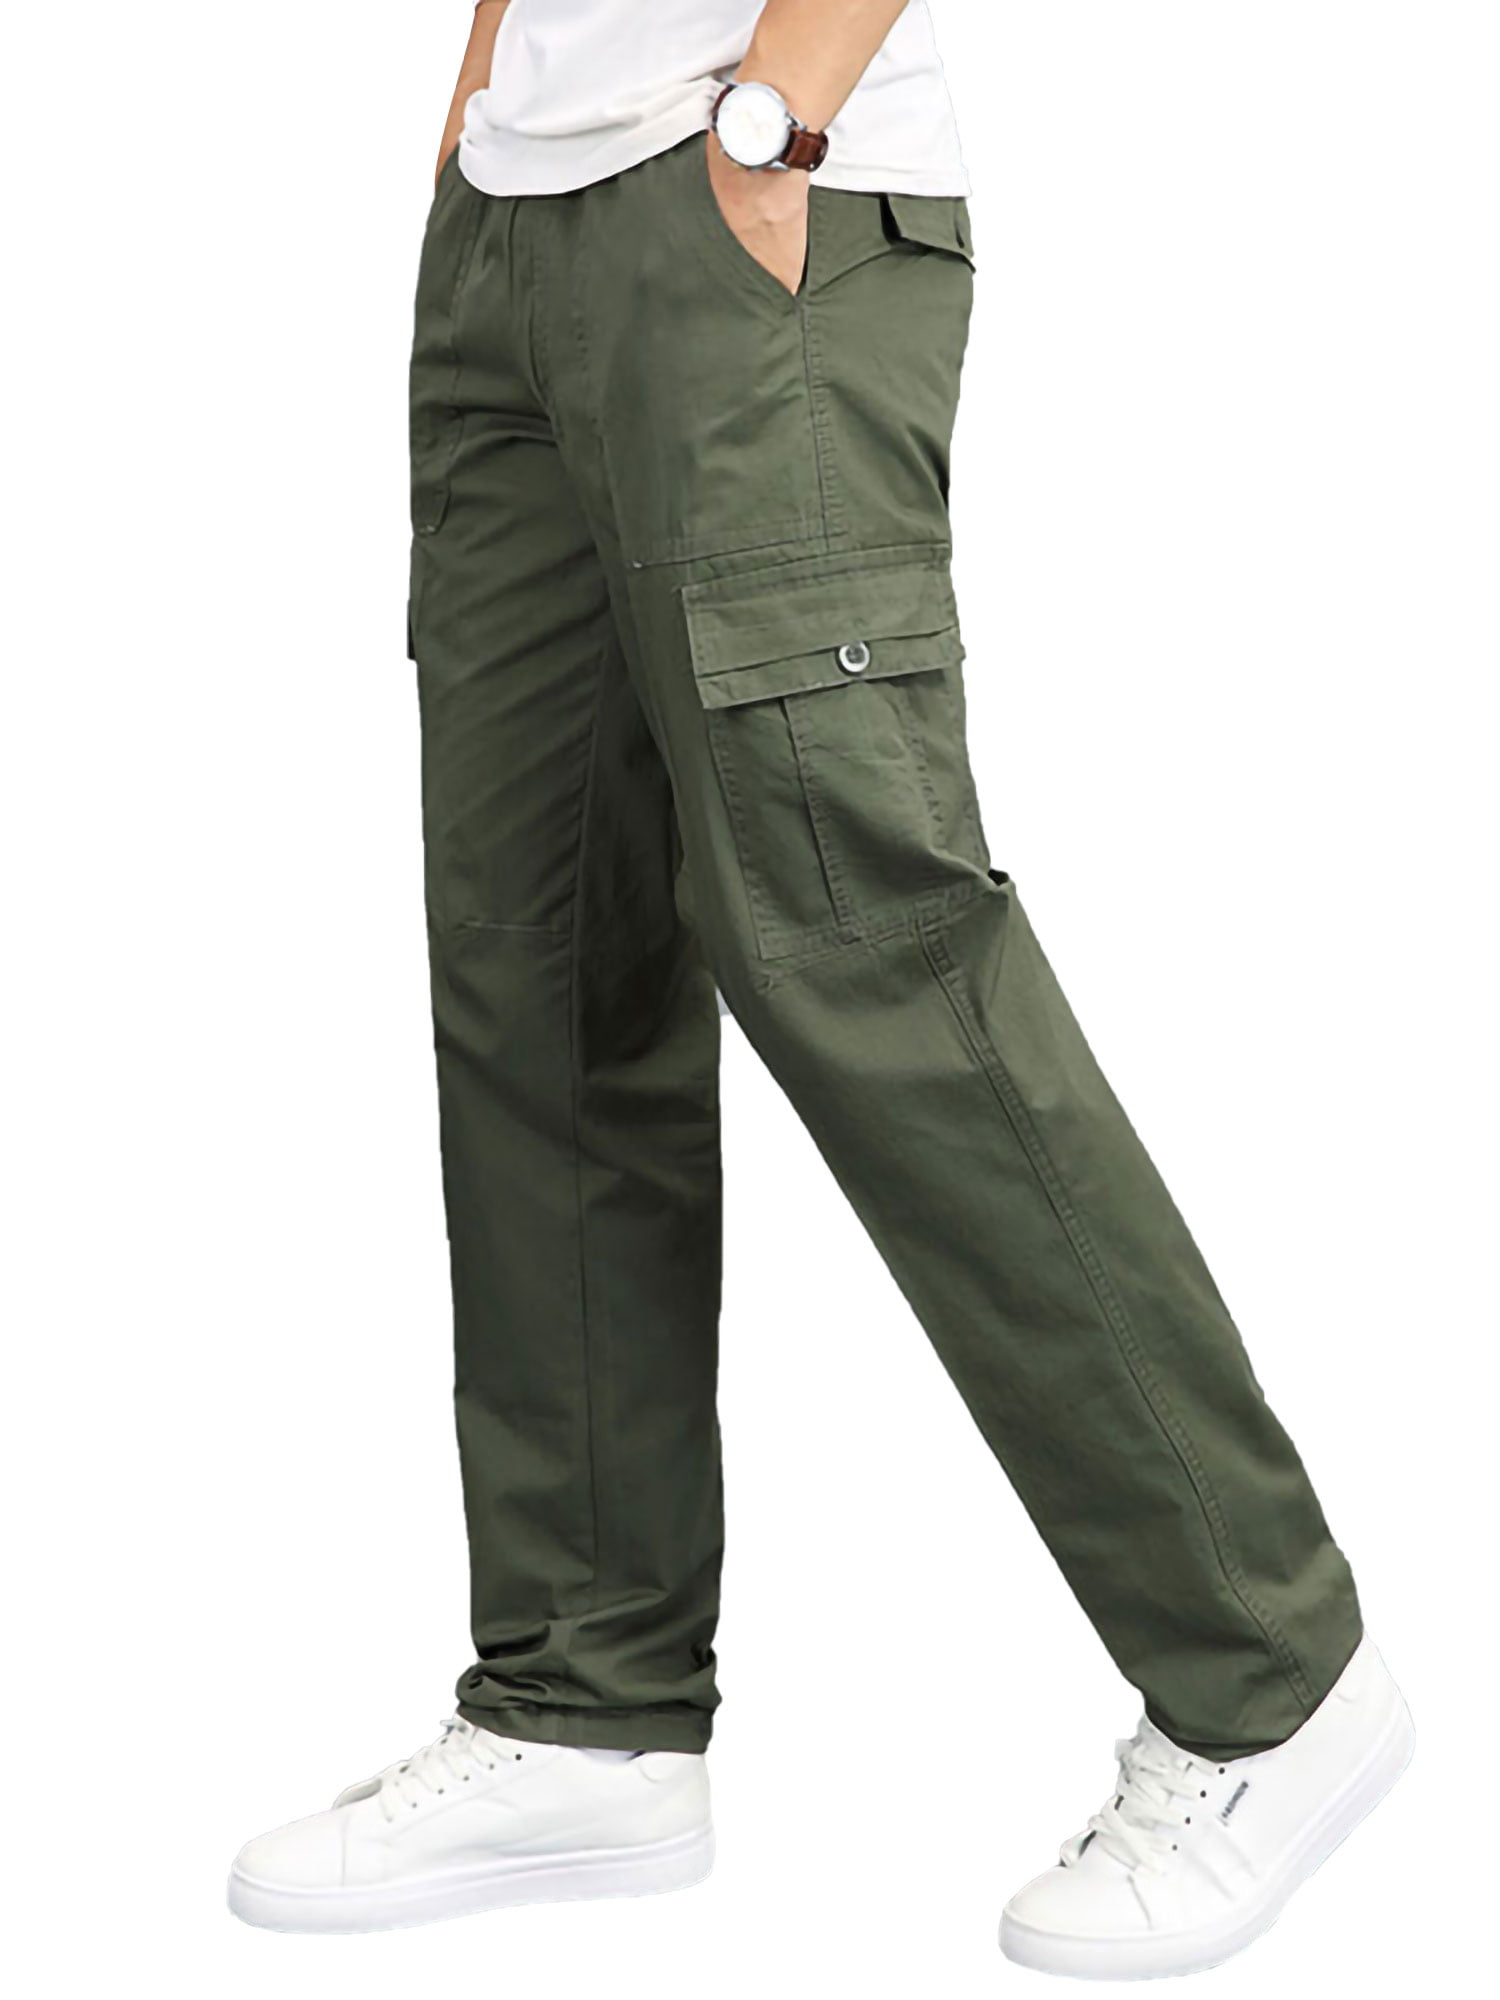 Mens Cargo Work Pants Combat Military Tactical Trousers Hiking Outdoor Casual 